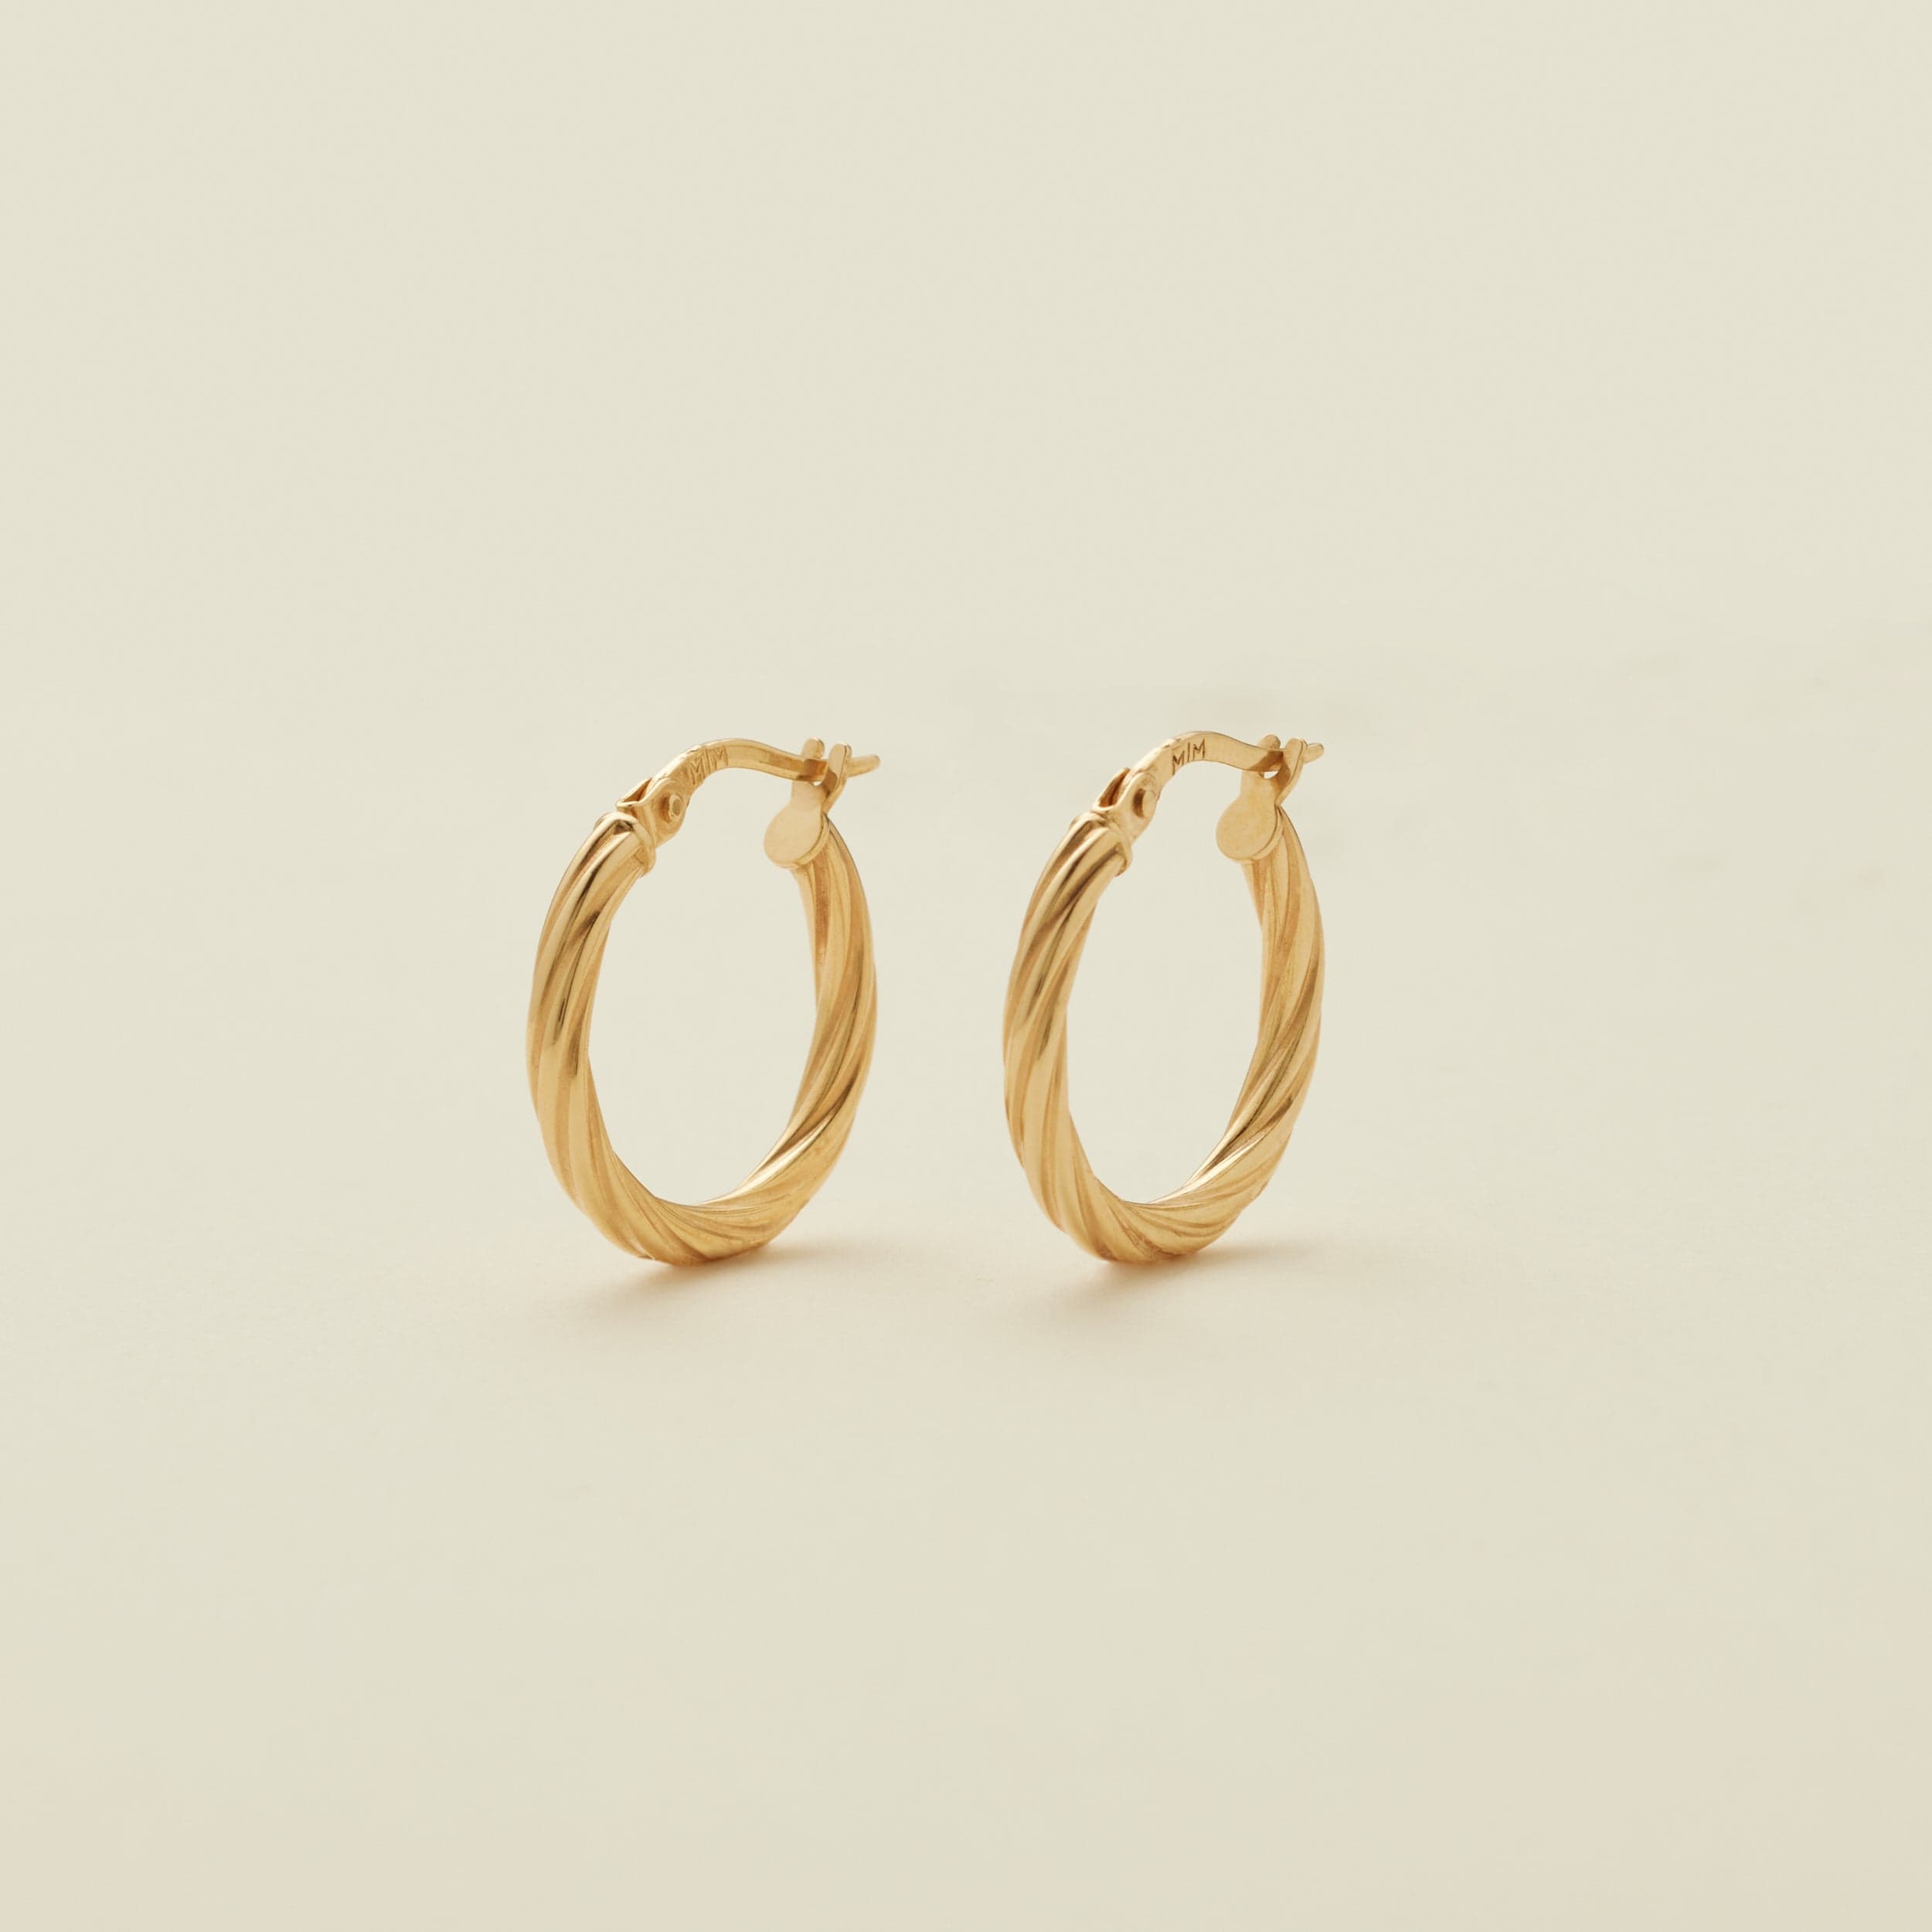 Solidindia Craft Metallic Gold Plated Hoop Round Earrings for Men and Women  : Amazon.in: Fashion